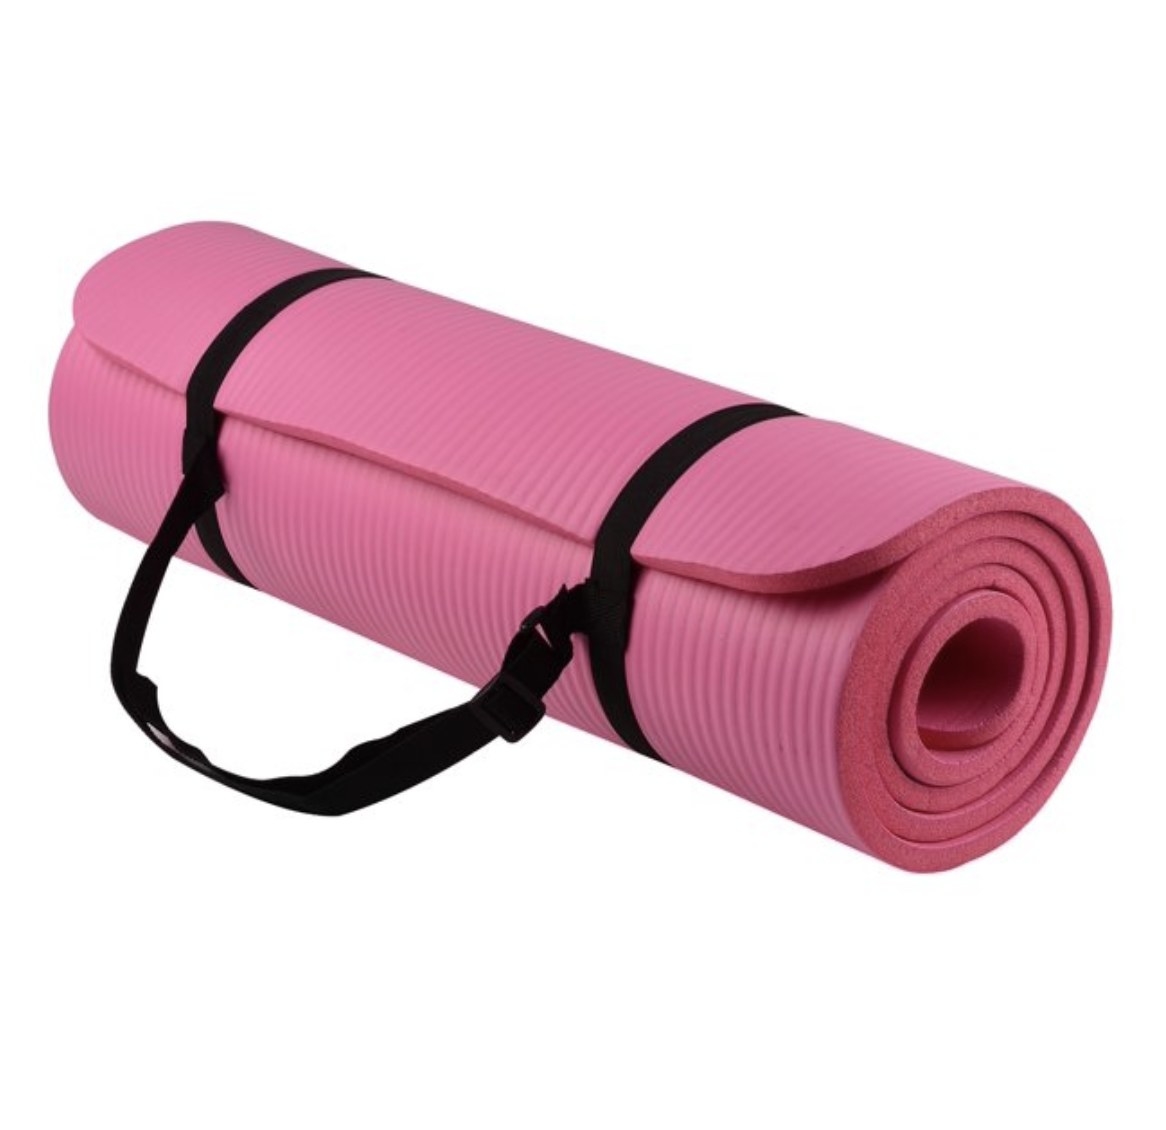 The pink yoga mat with carrying strap